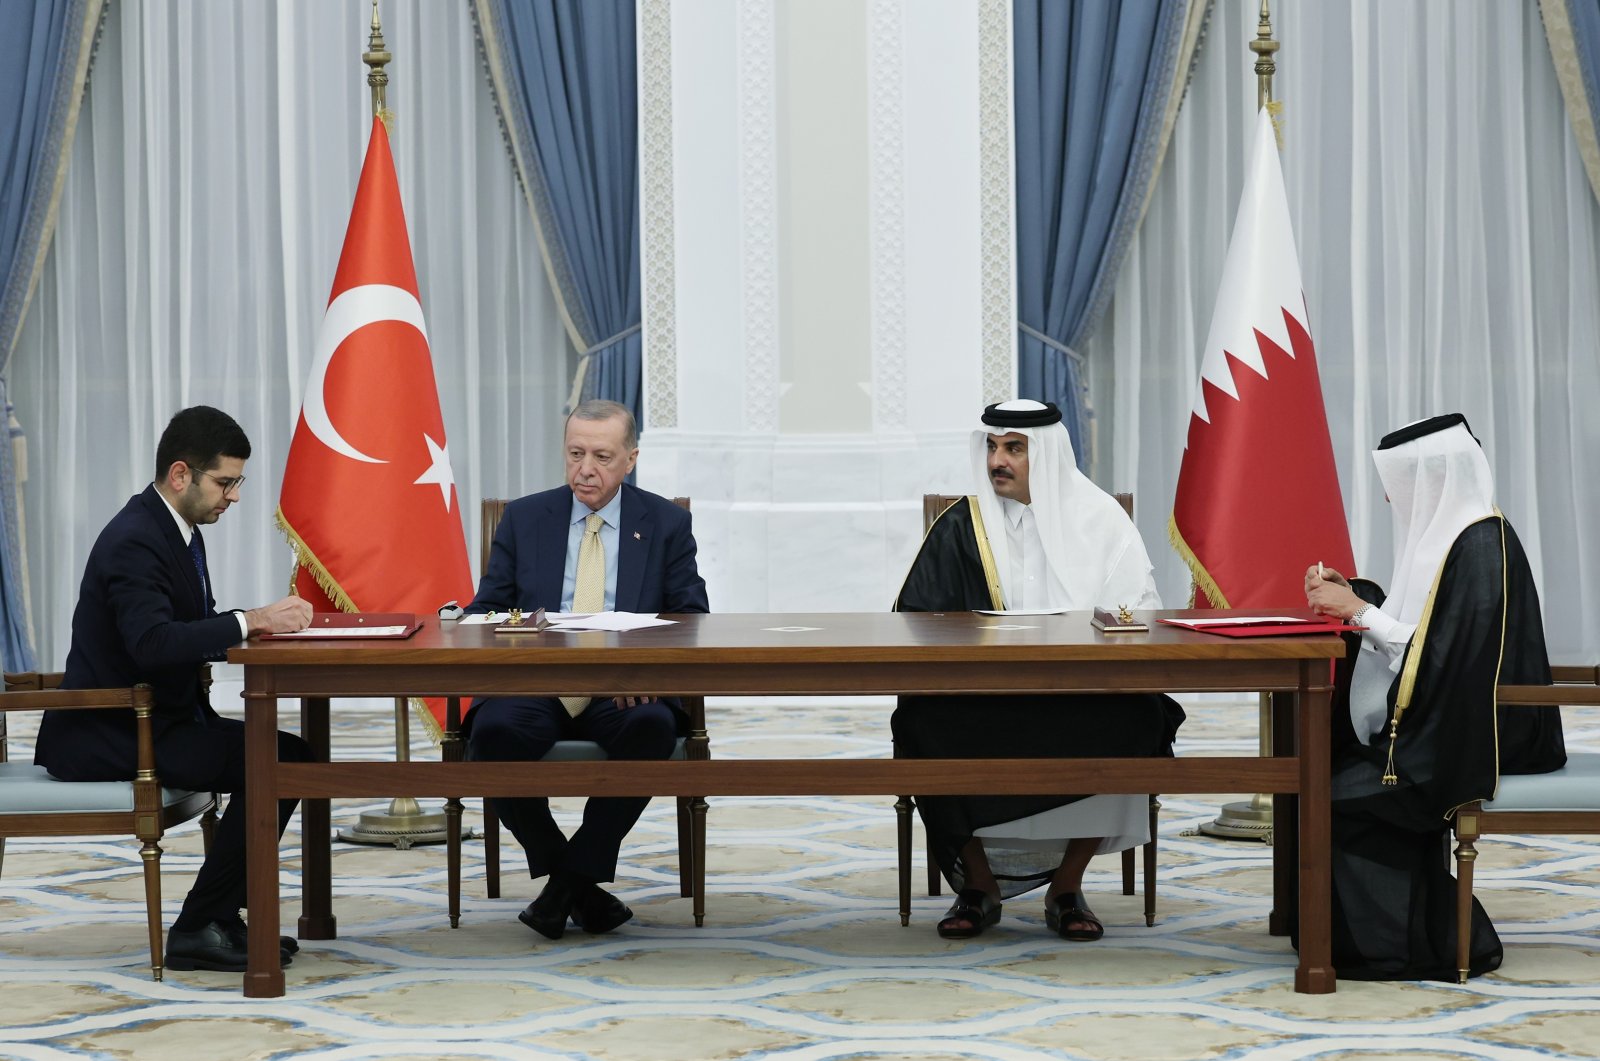 President Recep Tayyip Erdoğan (3rd R) and Qatari Emir Sheikh Tamim bin Hamad Al Thani (2nd R) are photographed during the signing ceremony of the agreements between the two countries, Doha, Qatar, Dec. 4, 2023. (IHA Photo)